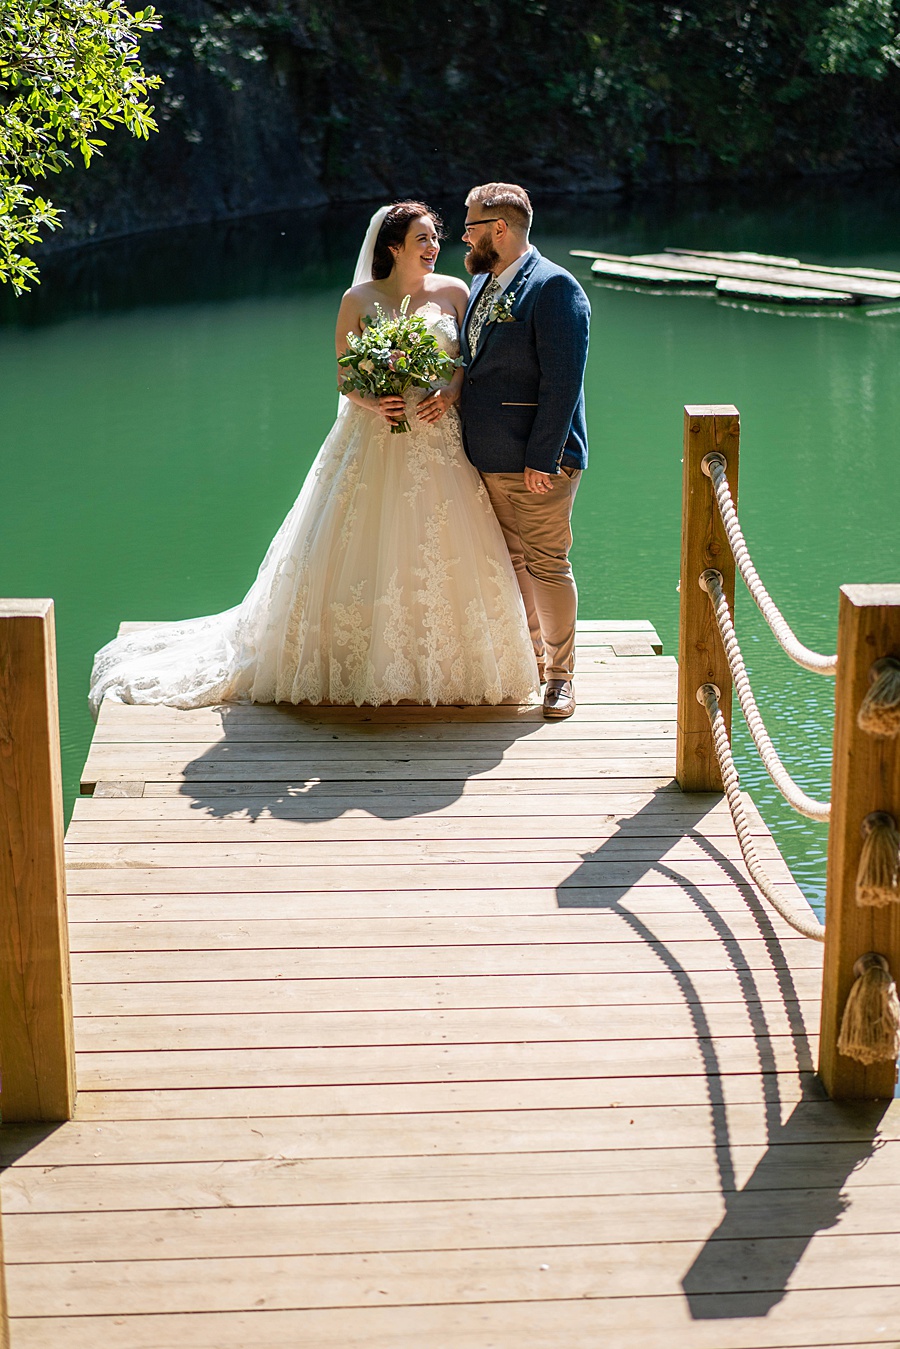 Mike and Kelly’s amazing Cornish tipi wedding, with Linus Moran Photography